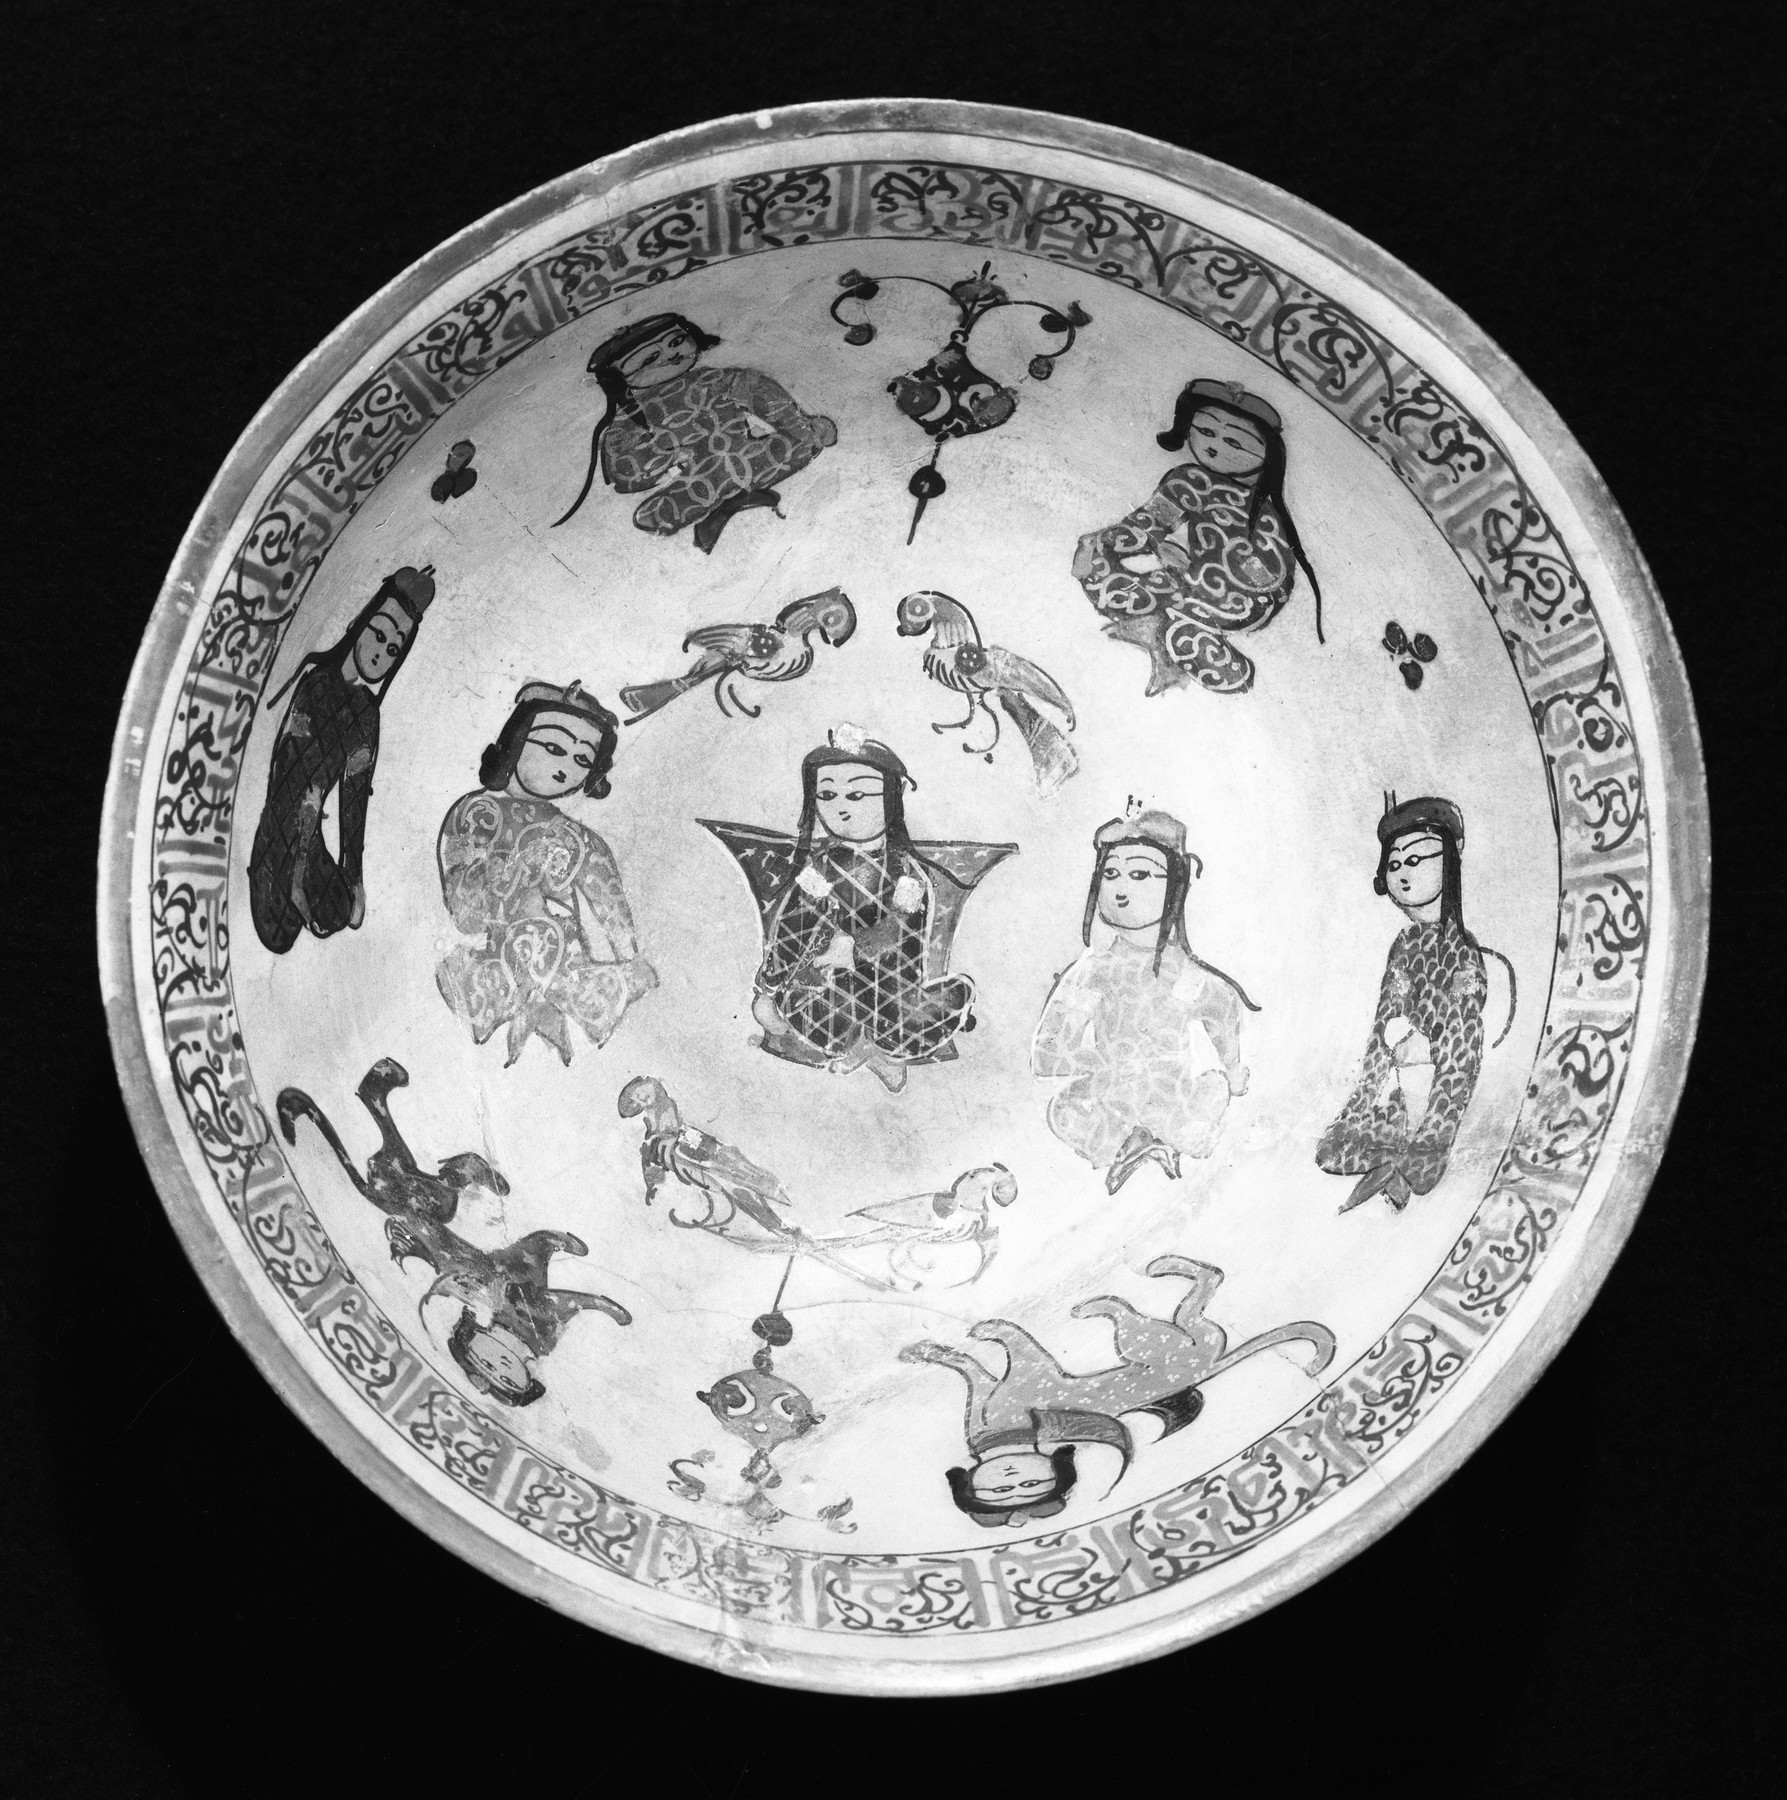 Image for Bowl with Prince, Courtiers, and Sphinxes